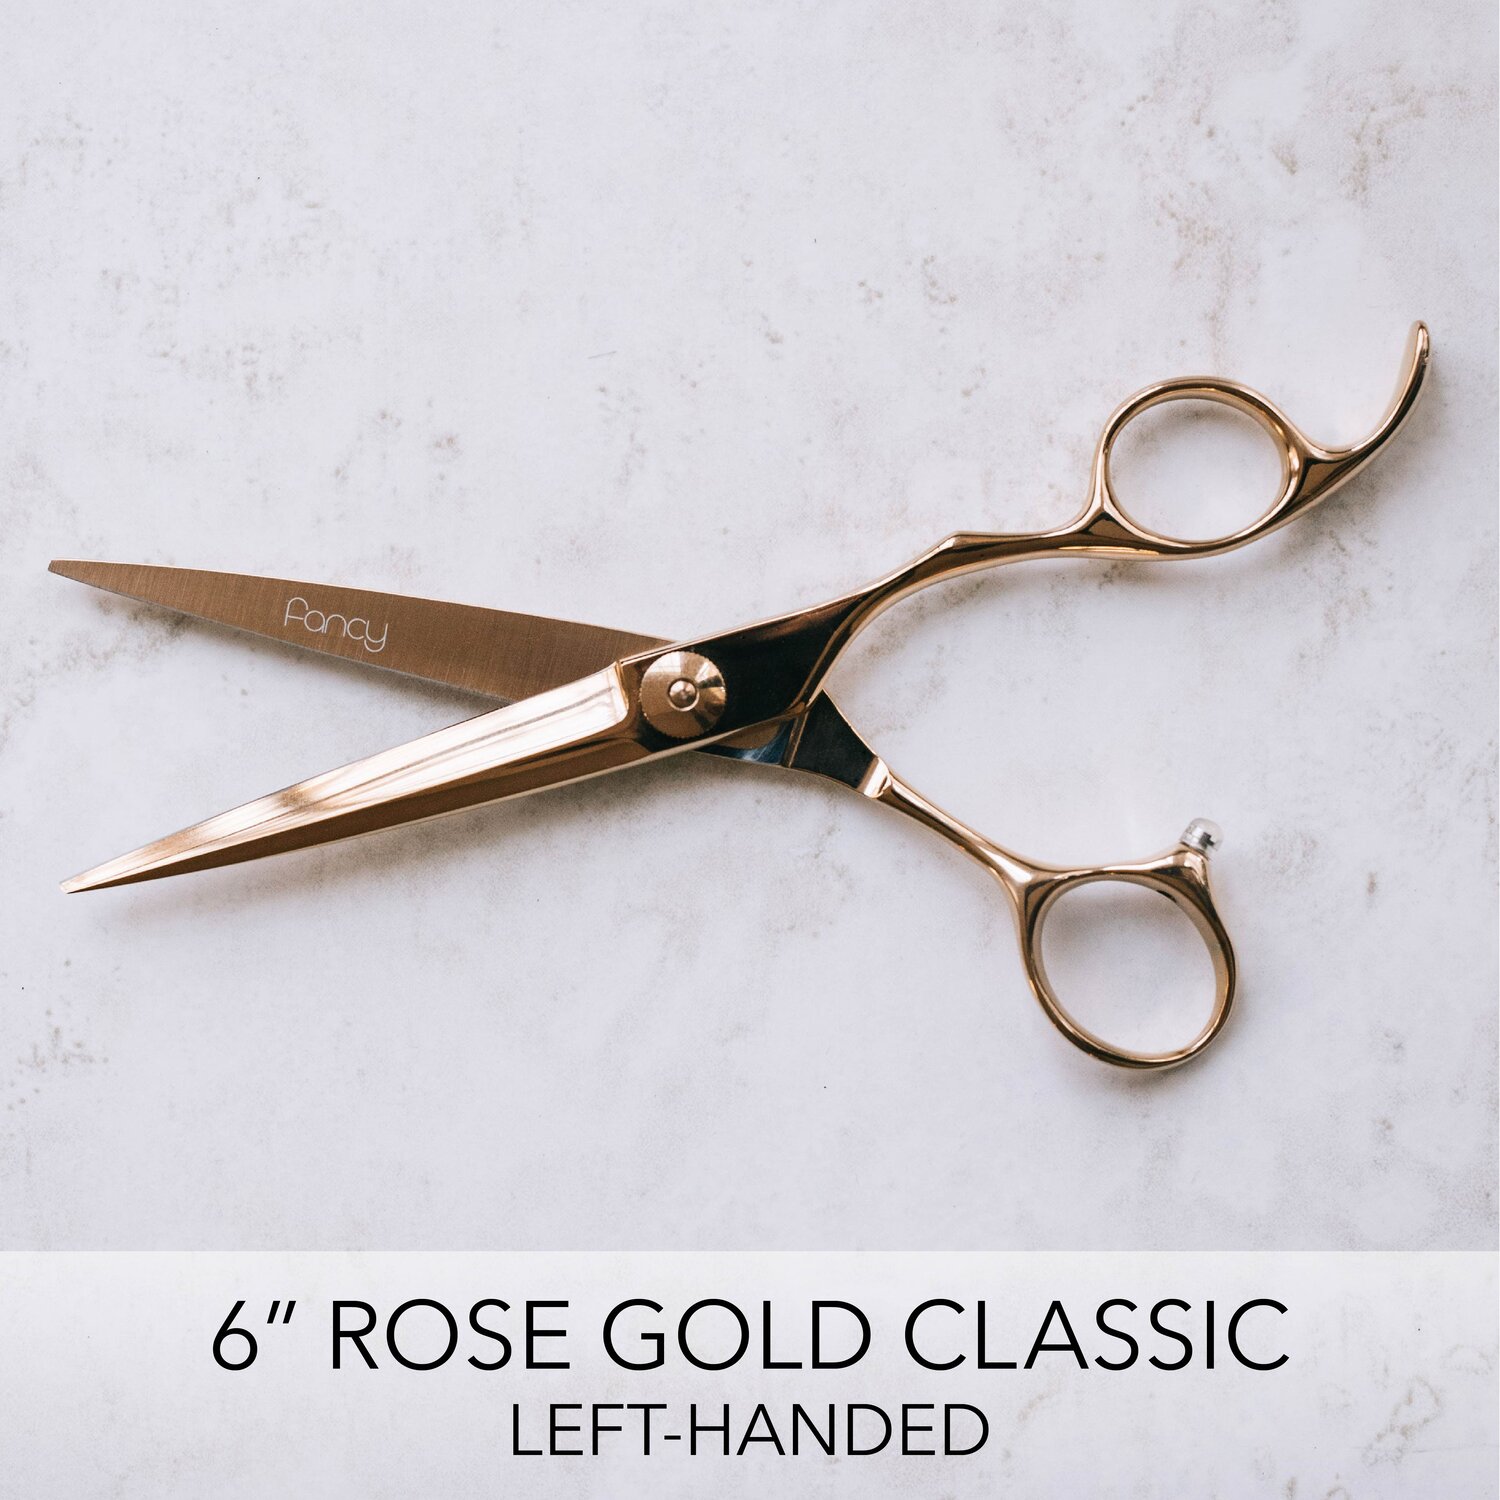 6 Rose Gold Classic (Left-Handed) — Fancy Hairdressers